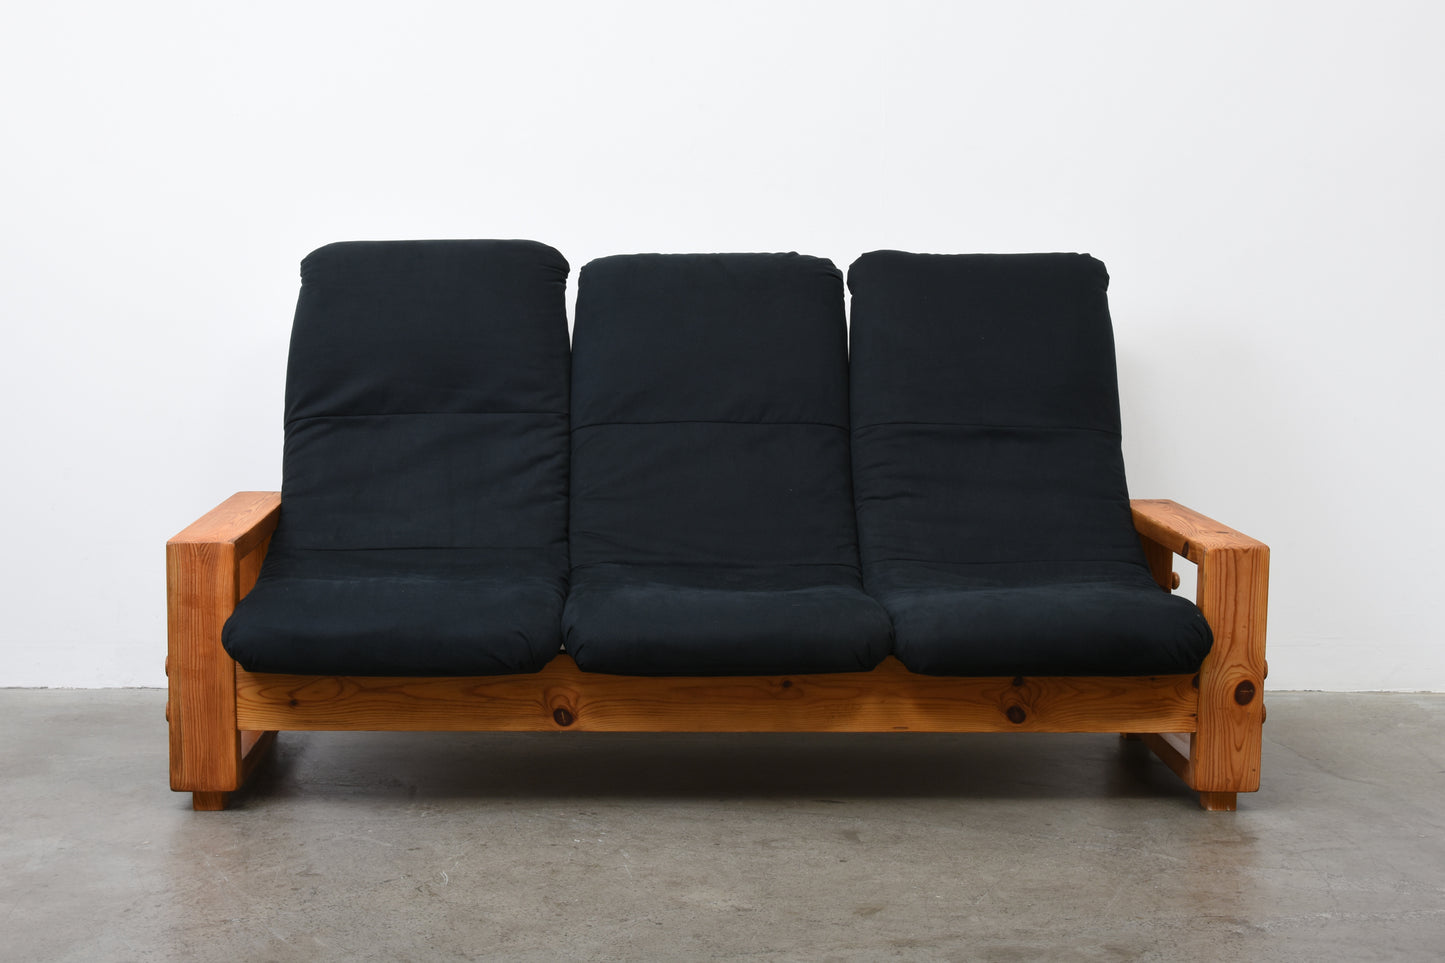 1970s reclining three seater by Leif Wikner